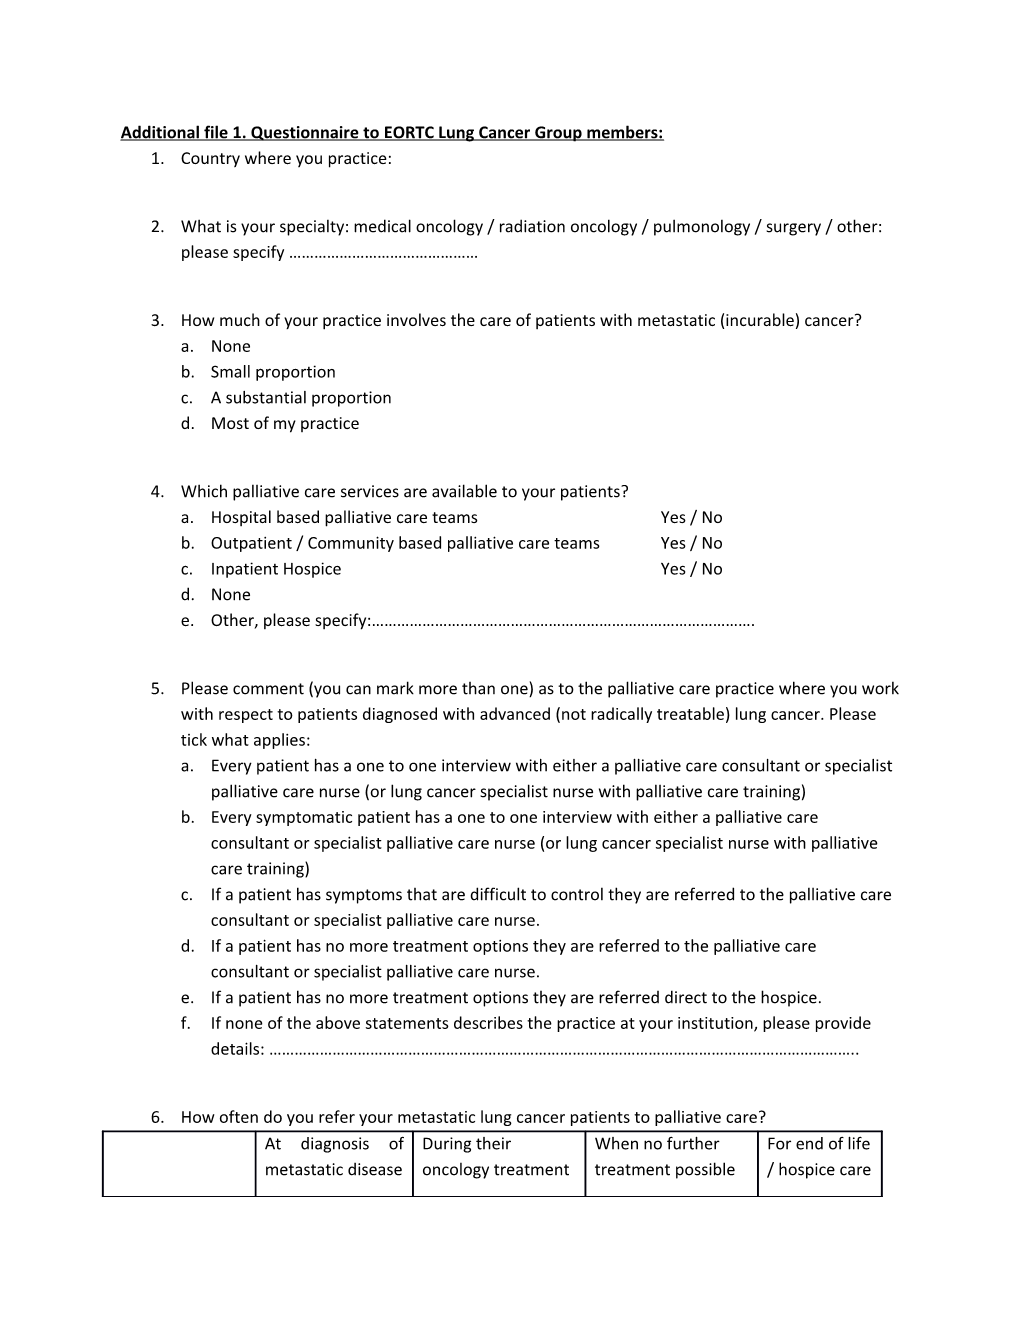 Additional File 1. Questionnaire to EORTC Lung Cancer Group Members